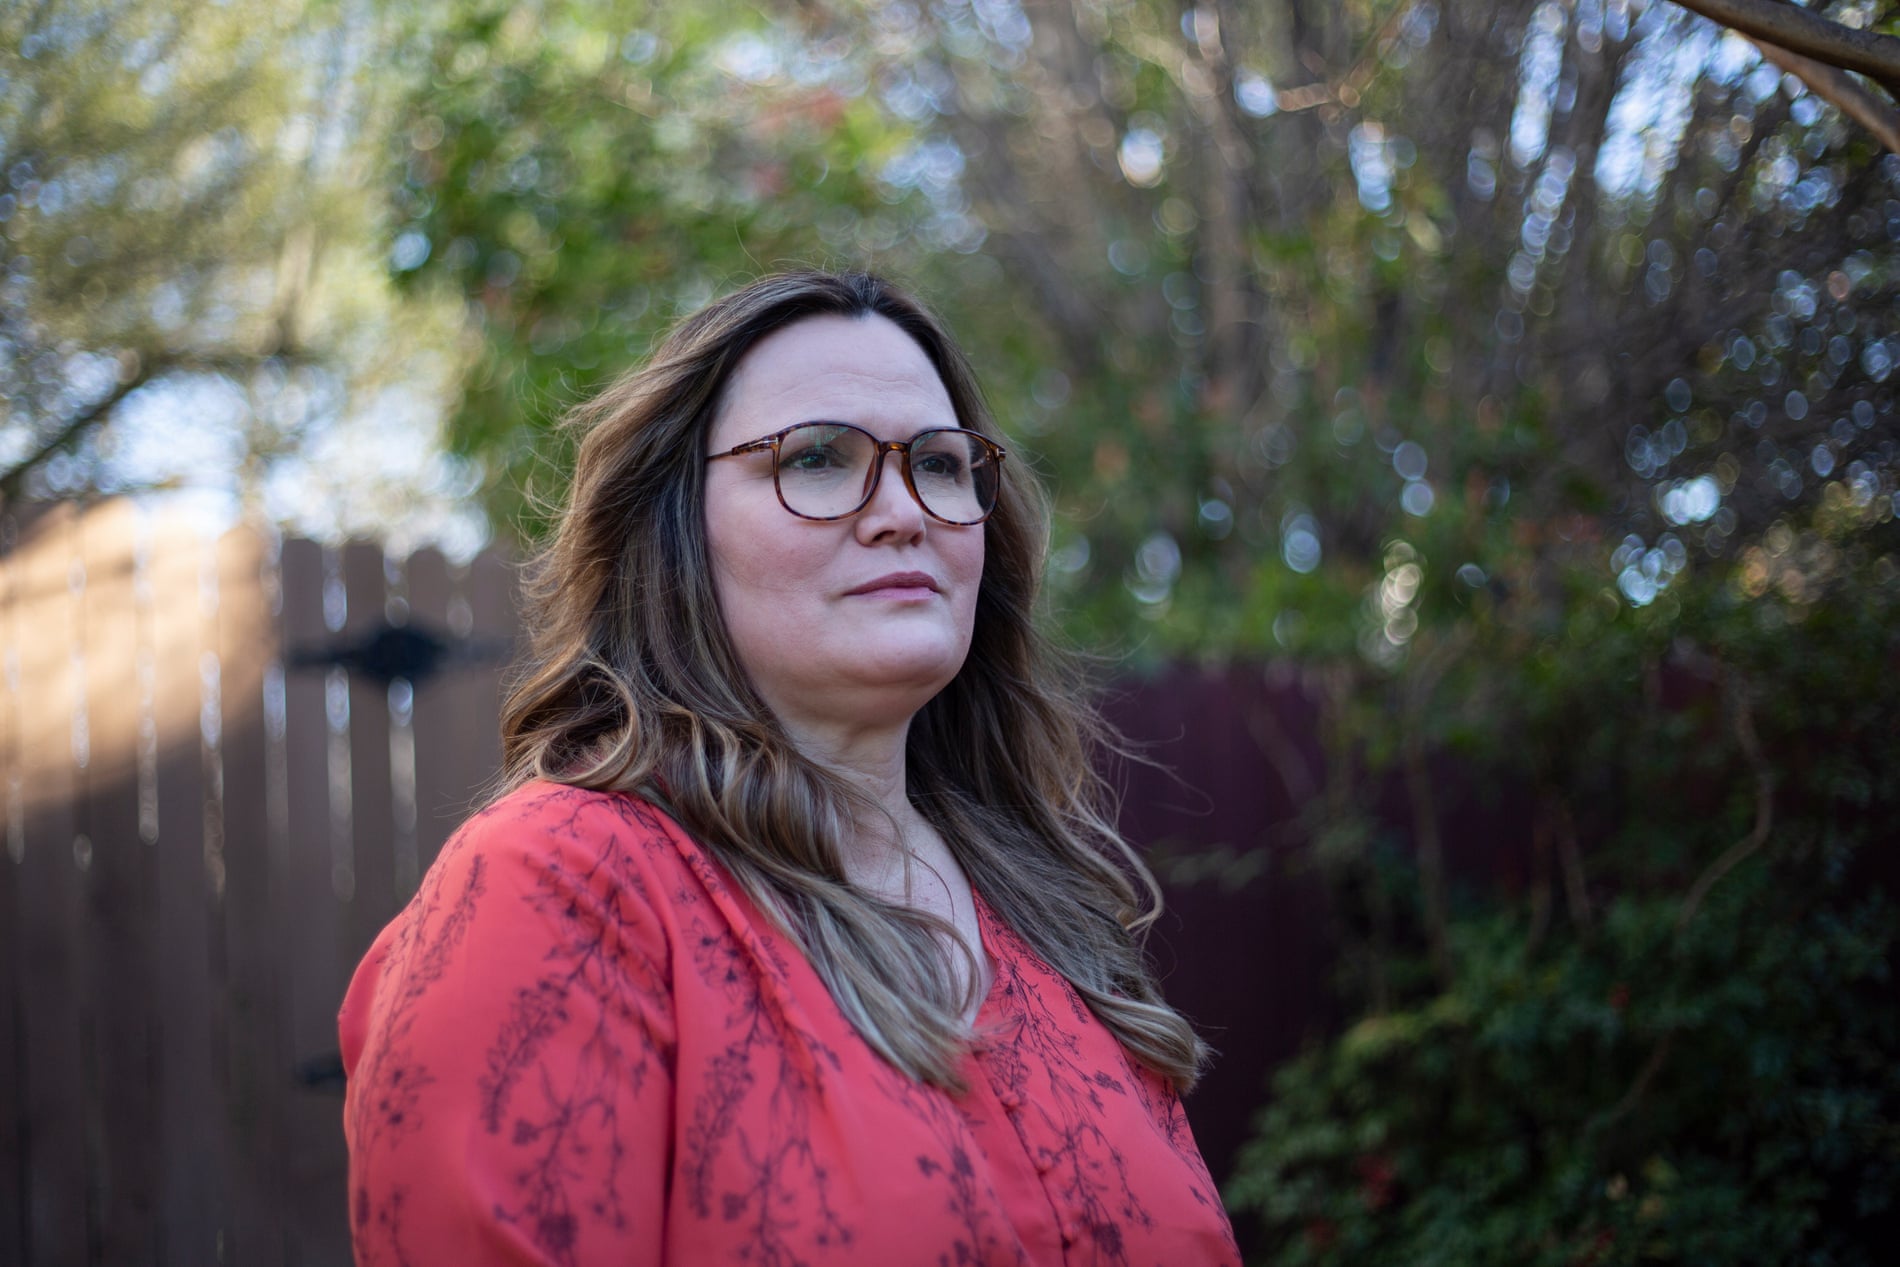 Dawn Wilcox, an activist documenting femicide in the United States, at her home in Plano, Texas. Dawn’s project, Women Count, focuses on women killed in 2018 and has so documented 1,635 cases so far.